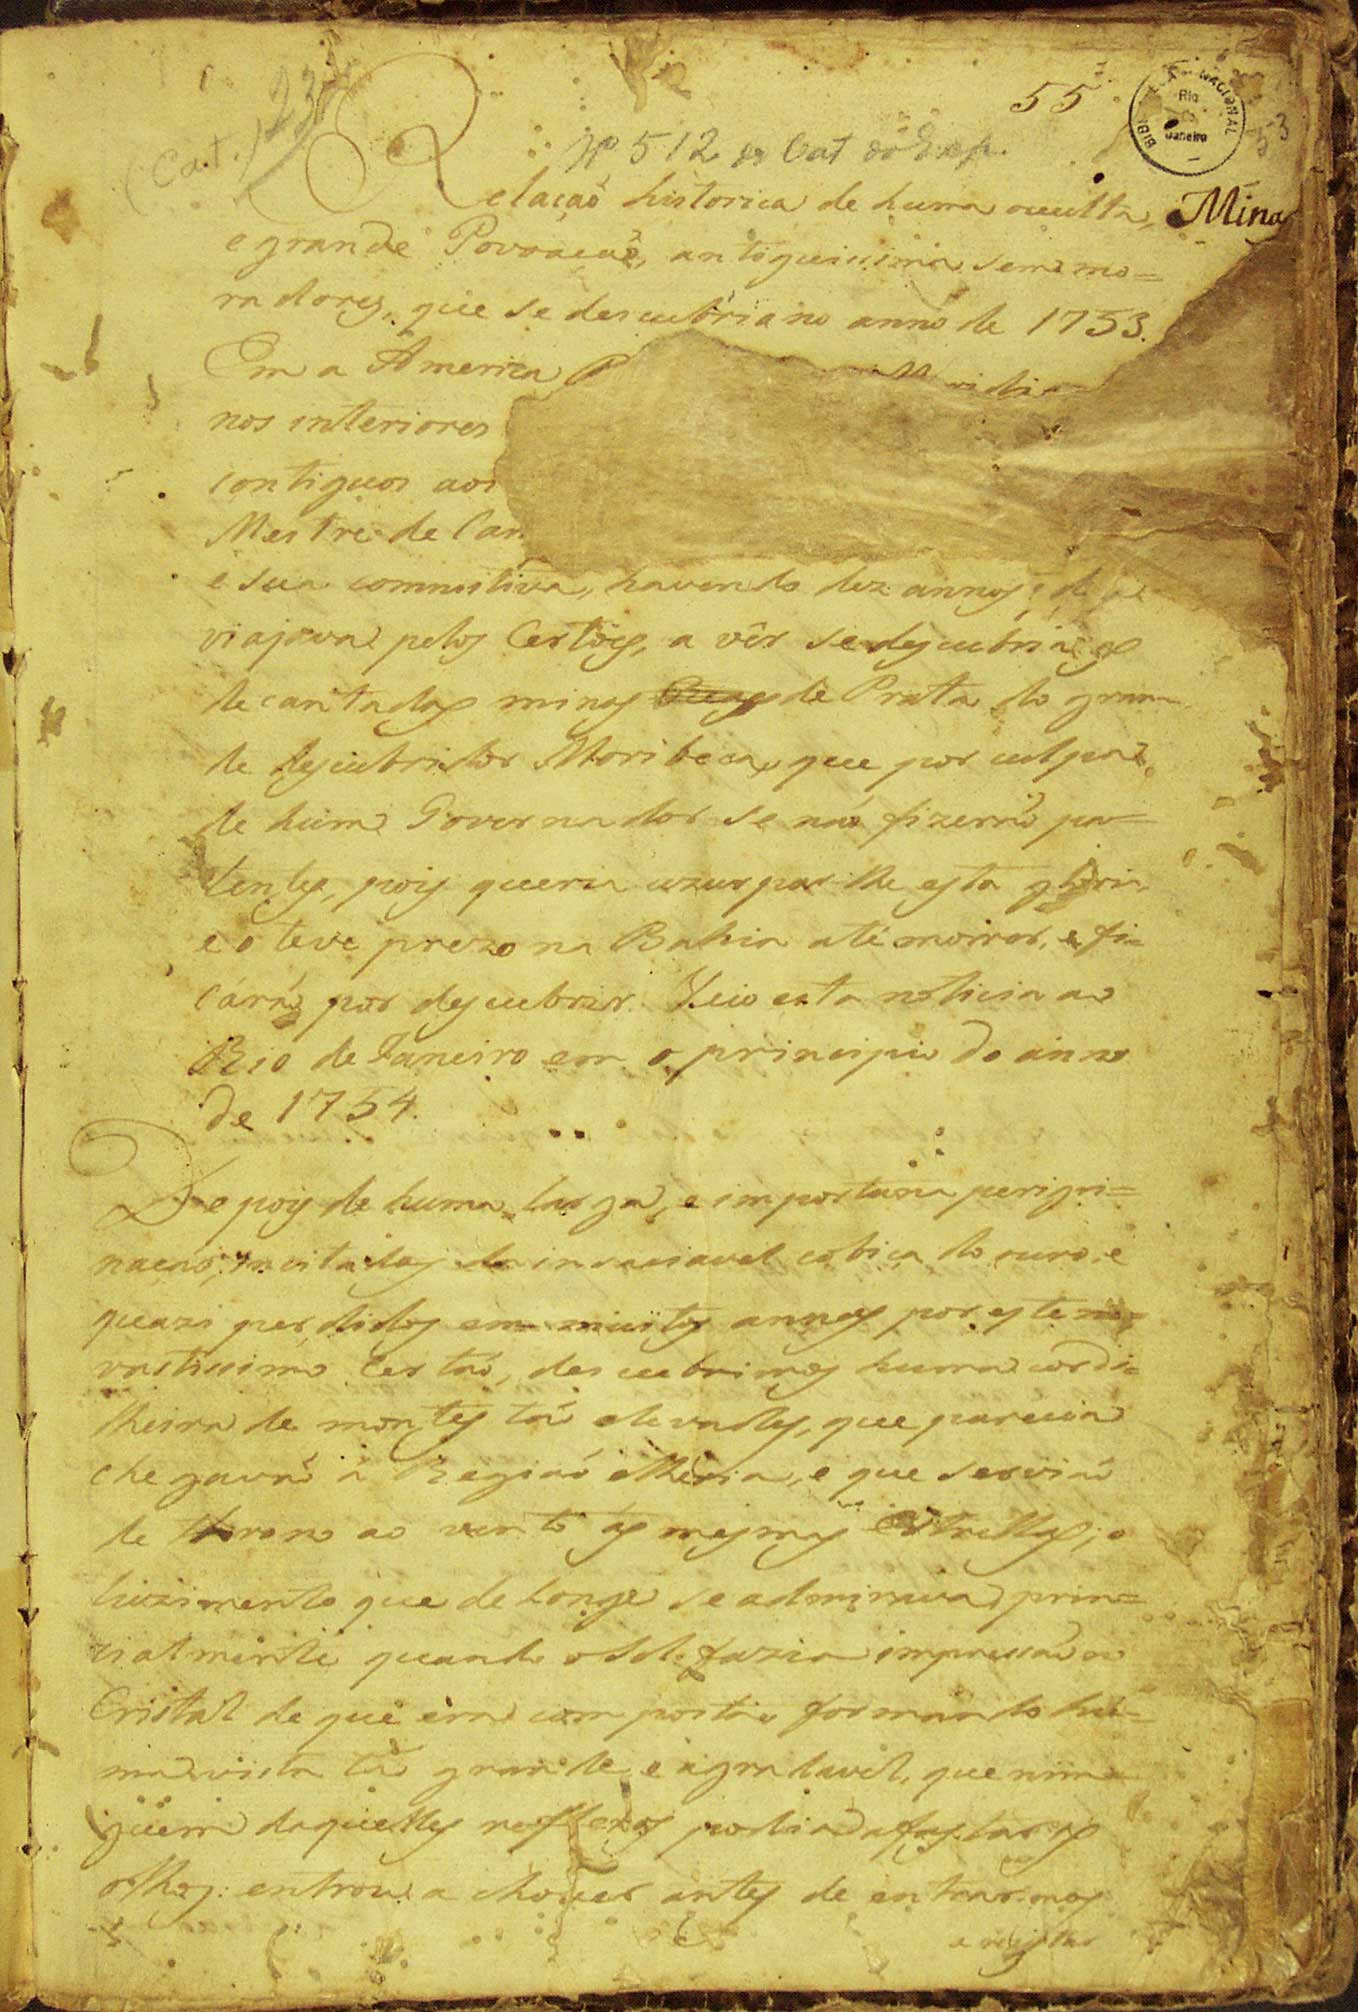 Page 1 of Manuscript 512, published in 1753 (unknow author).